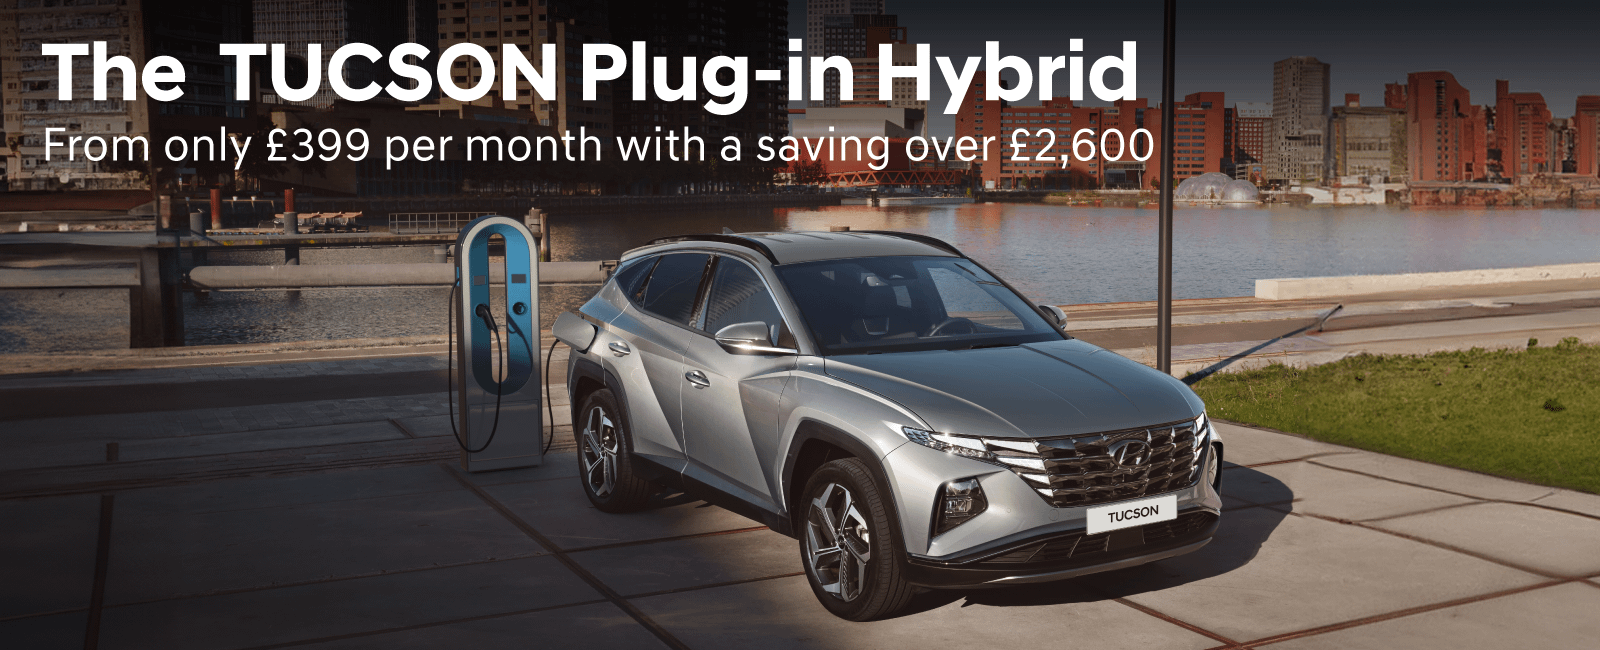 The Hyundai TUCSON Plug-in Hybrid from only £399 per month